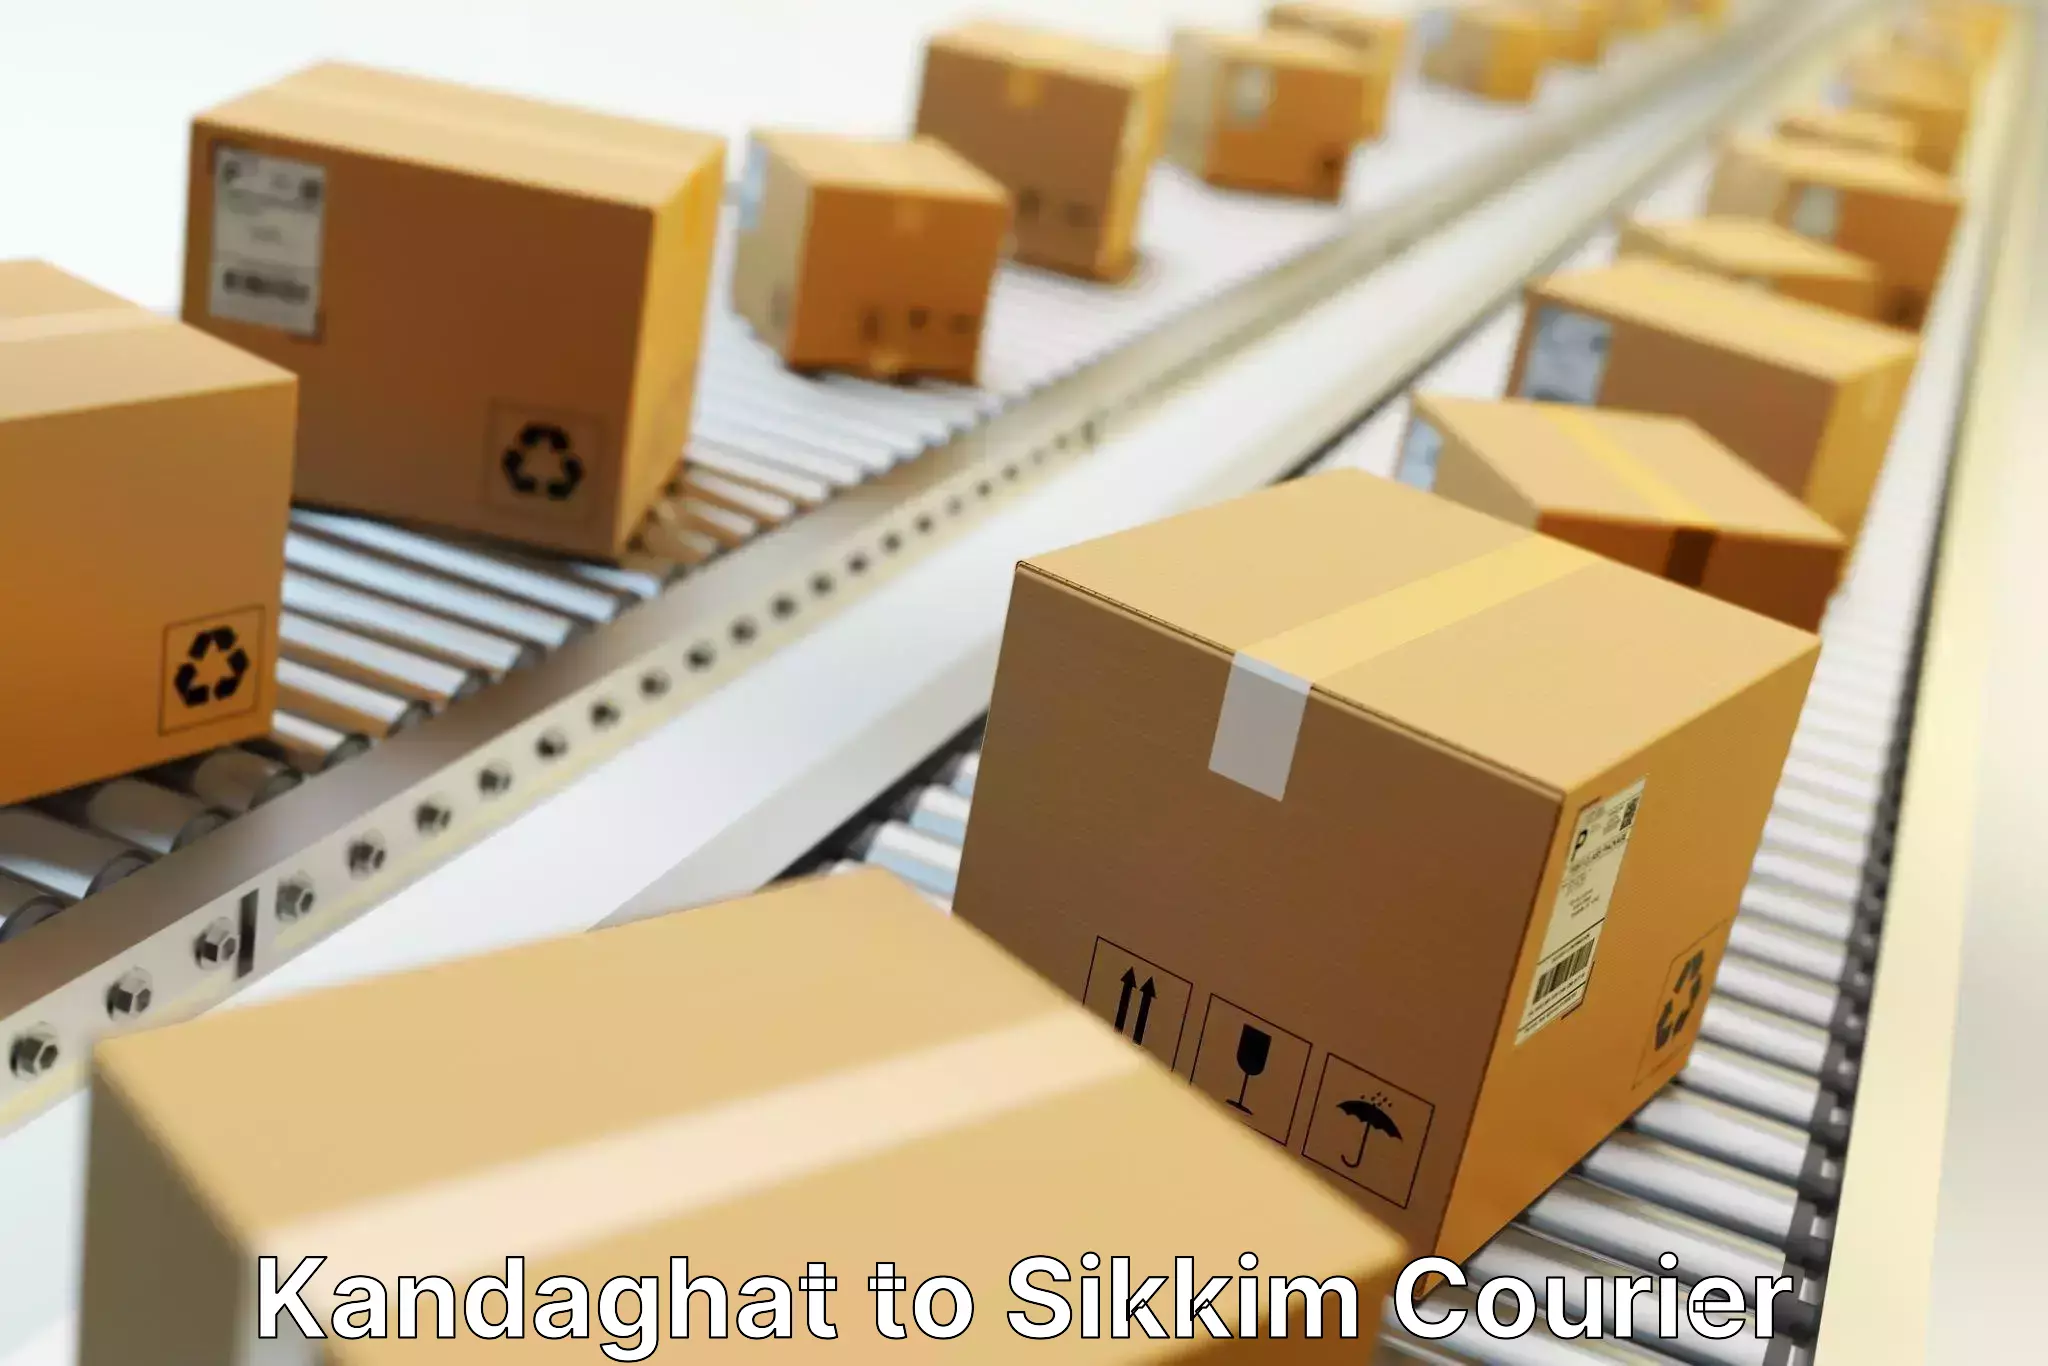 Specialized shipment handling Kandaghat to Sikkim